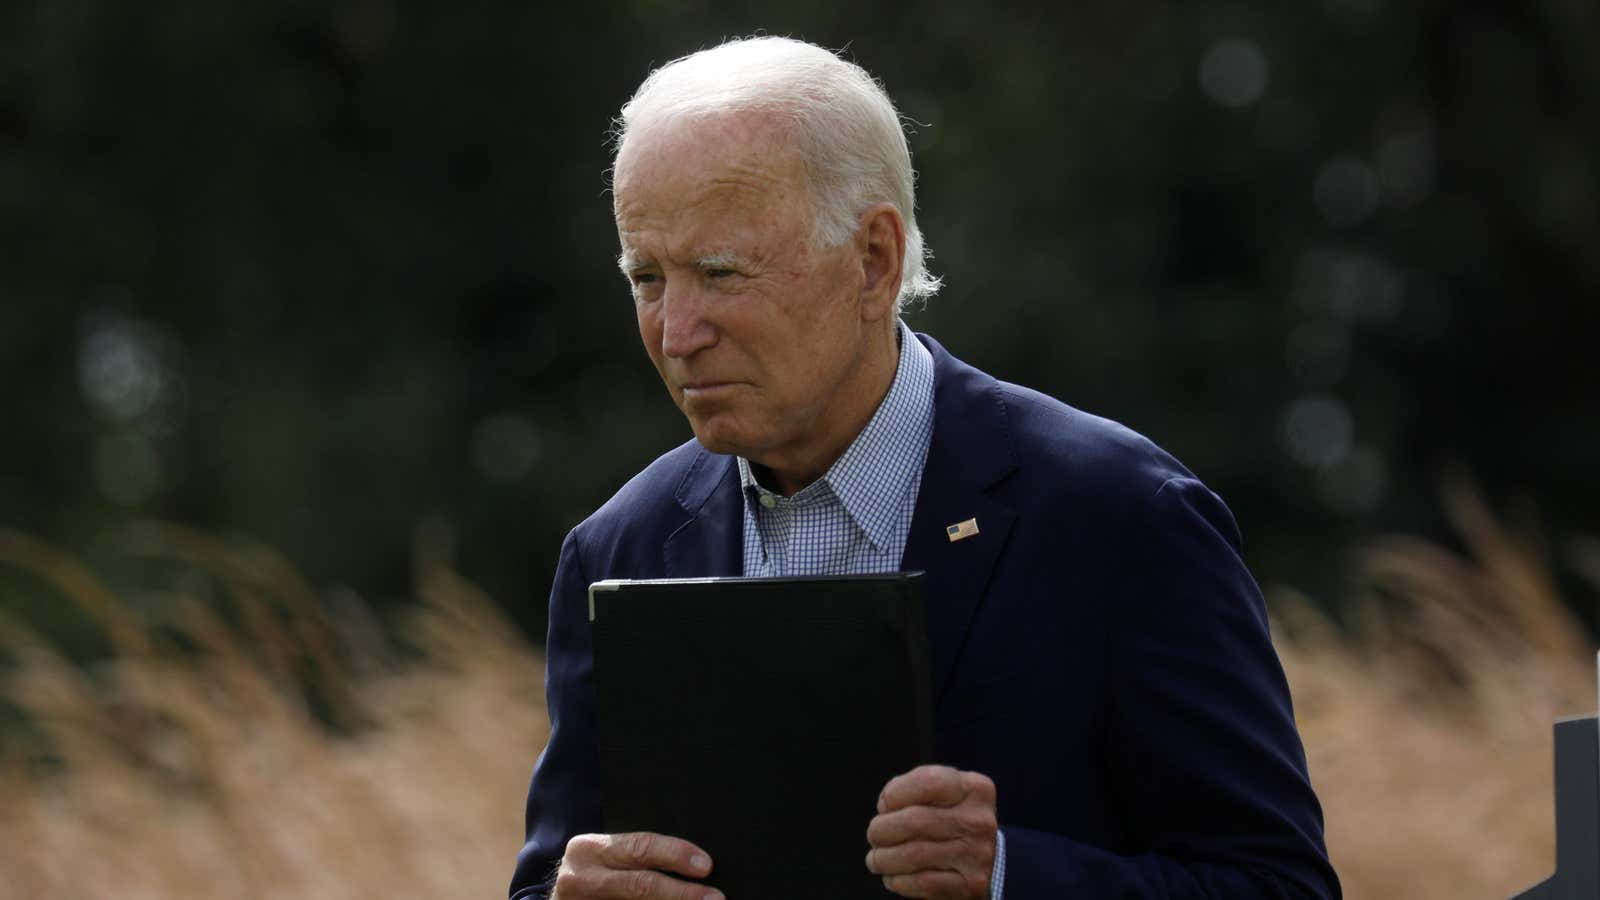 Even without Democratic control of the Senate, Joe Biden will have a few options for climate action at his disposal.